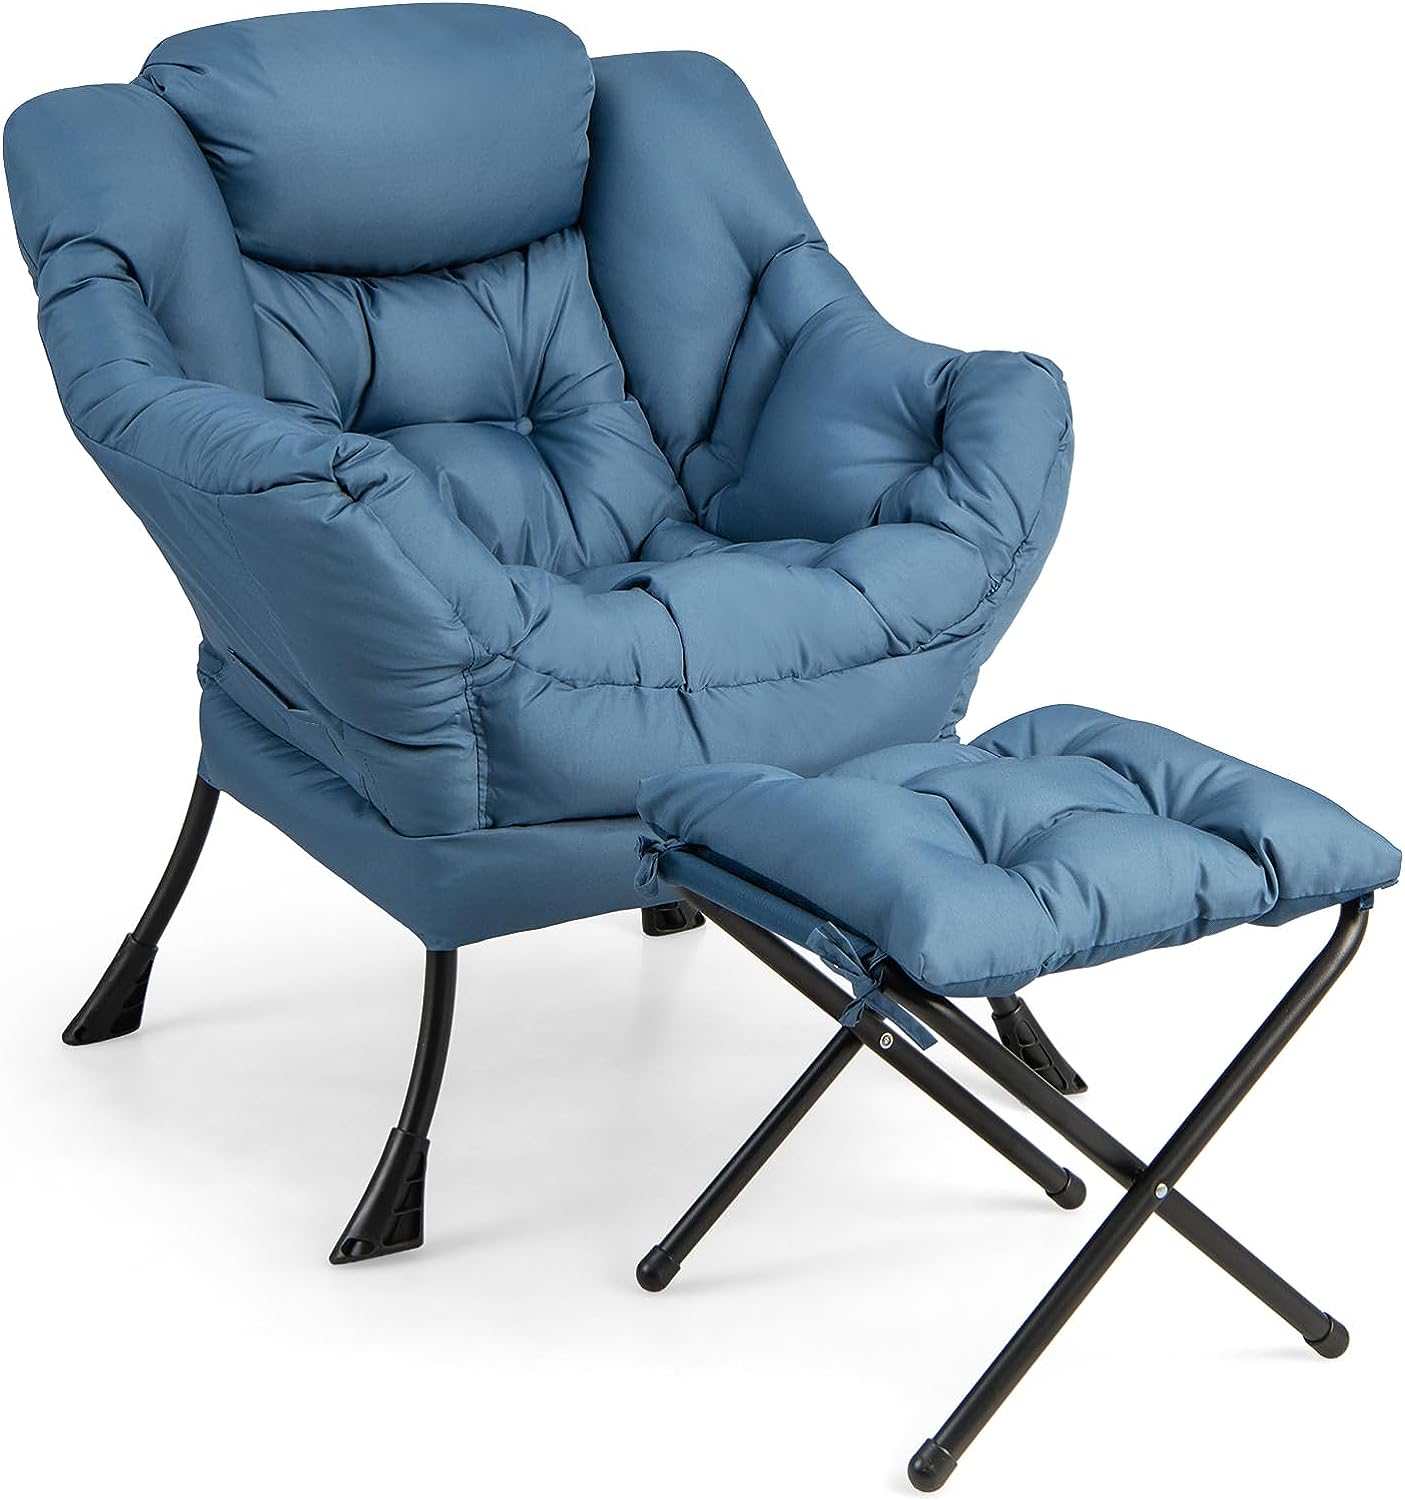 Modern Lazy Chair, Accent Contemporary Lounge Chair - Giantex